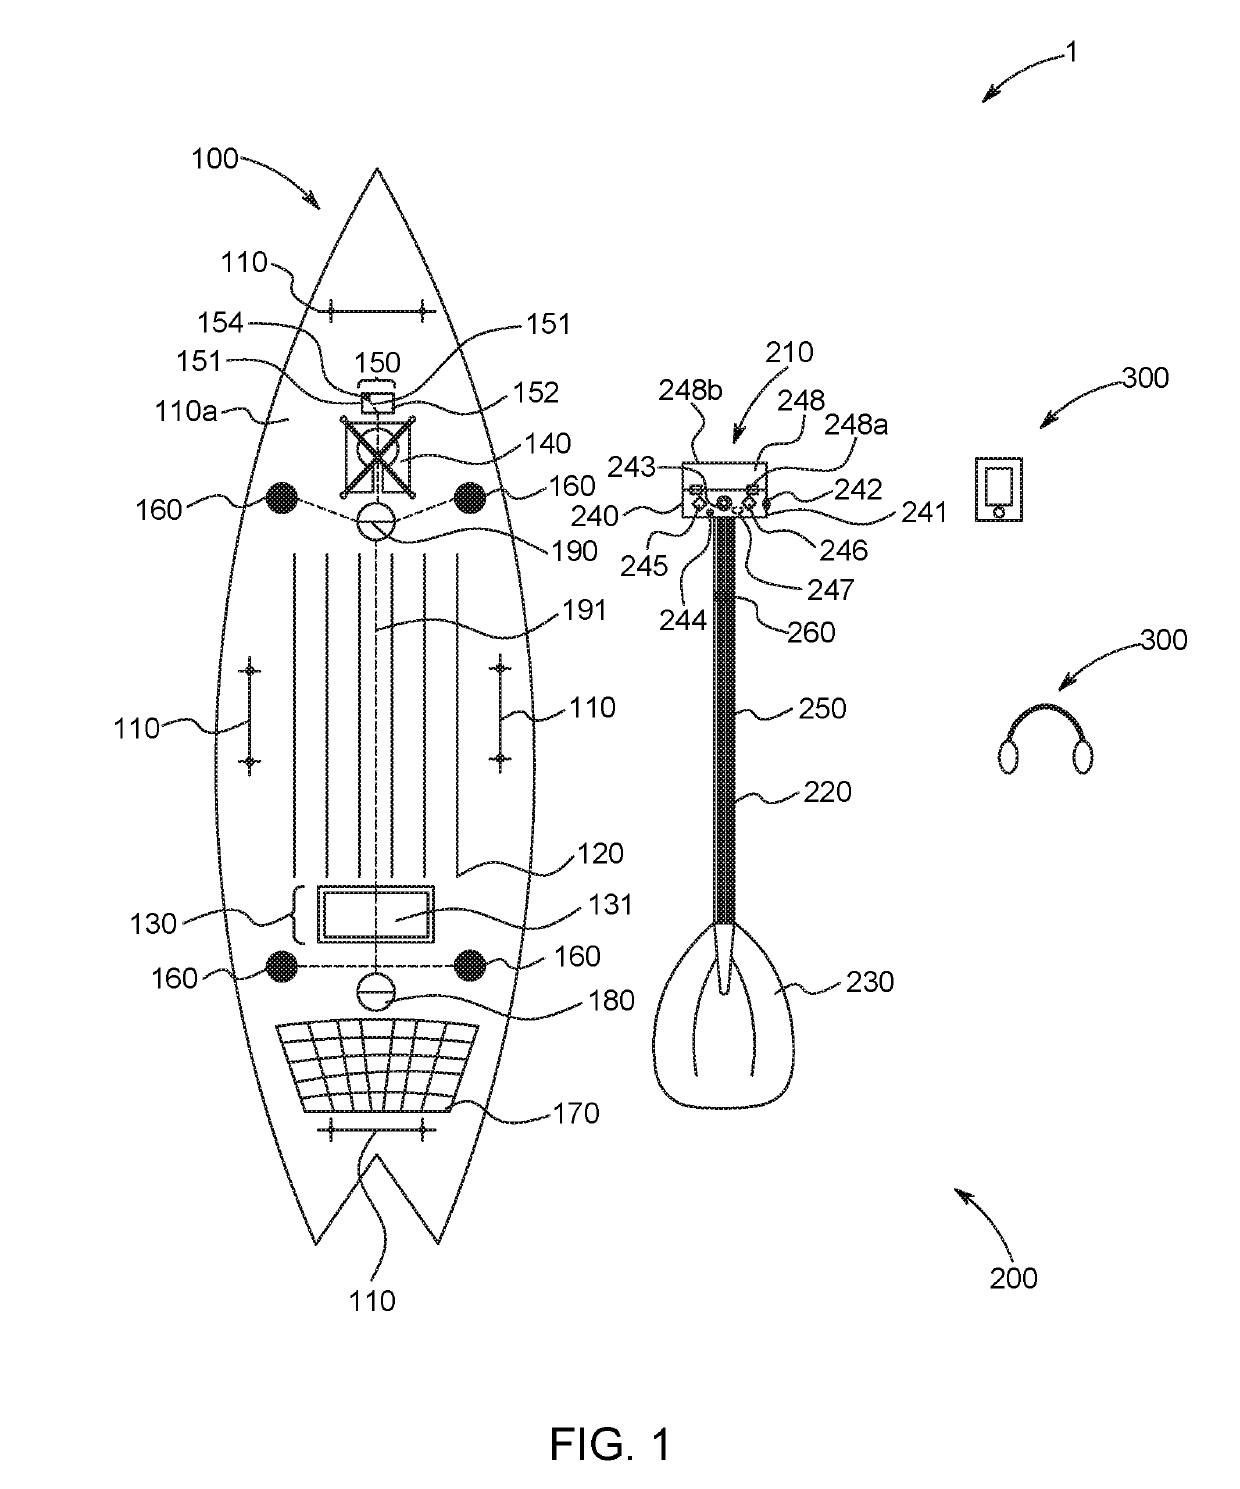 Paddle board wireless communication device and system